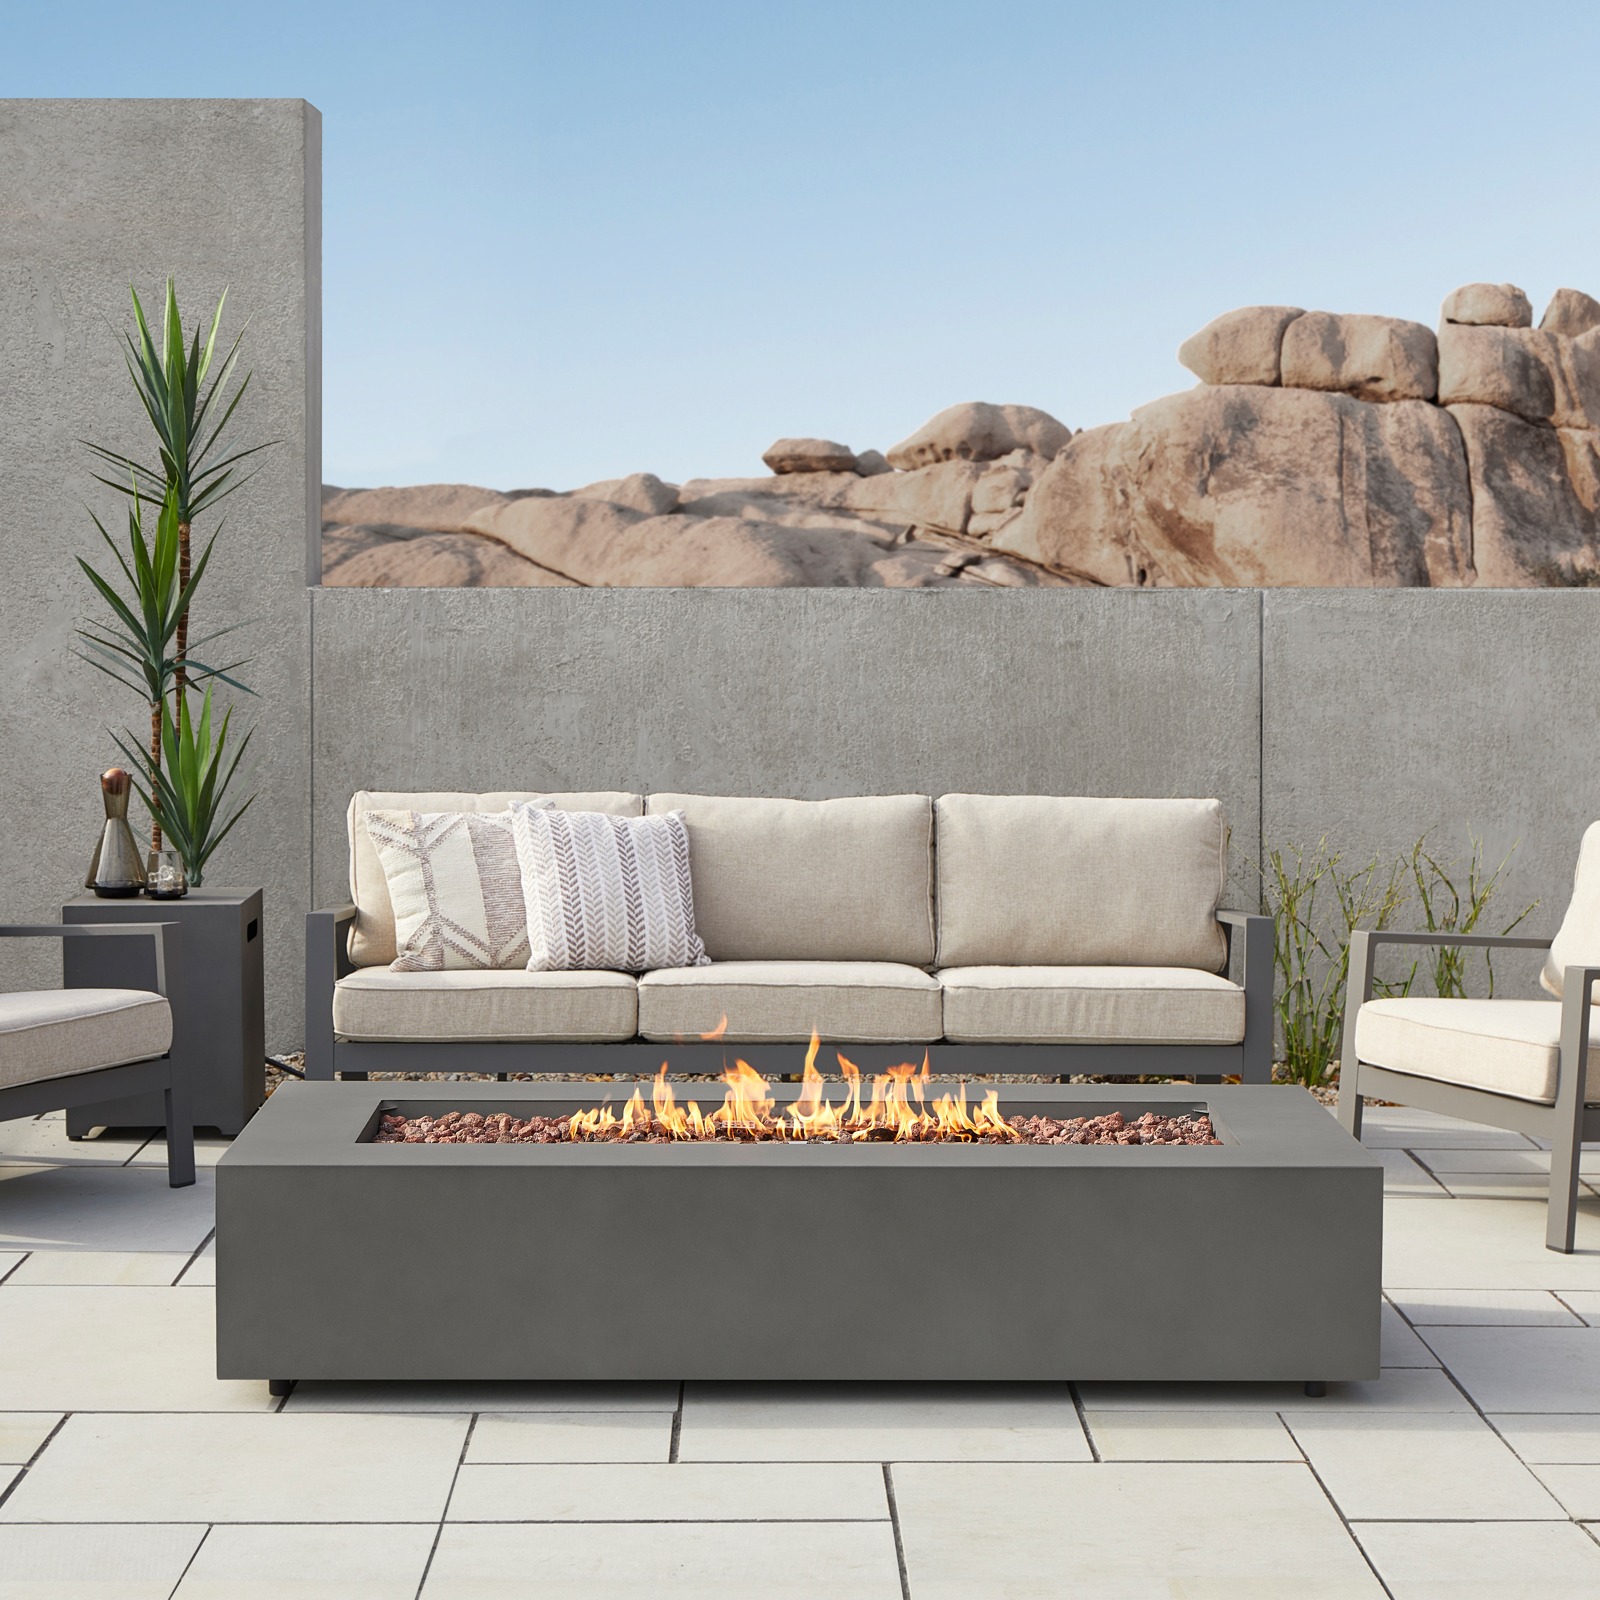 Aegean 70" Rectangle Propane Fire Pit Outdoor Fireplace Fire Table for Backyard or Patio Weathered Slate